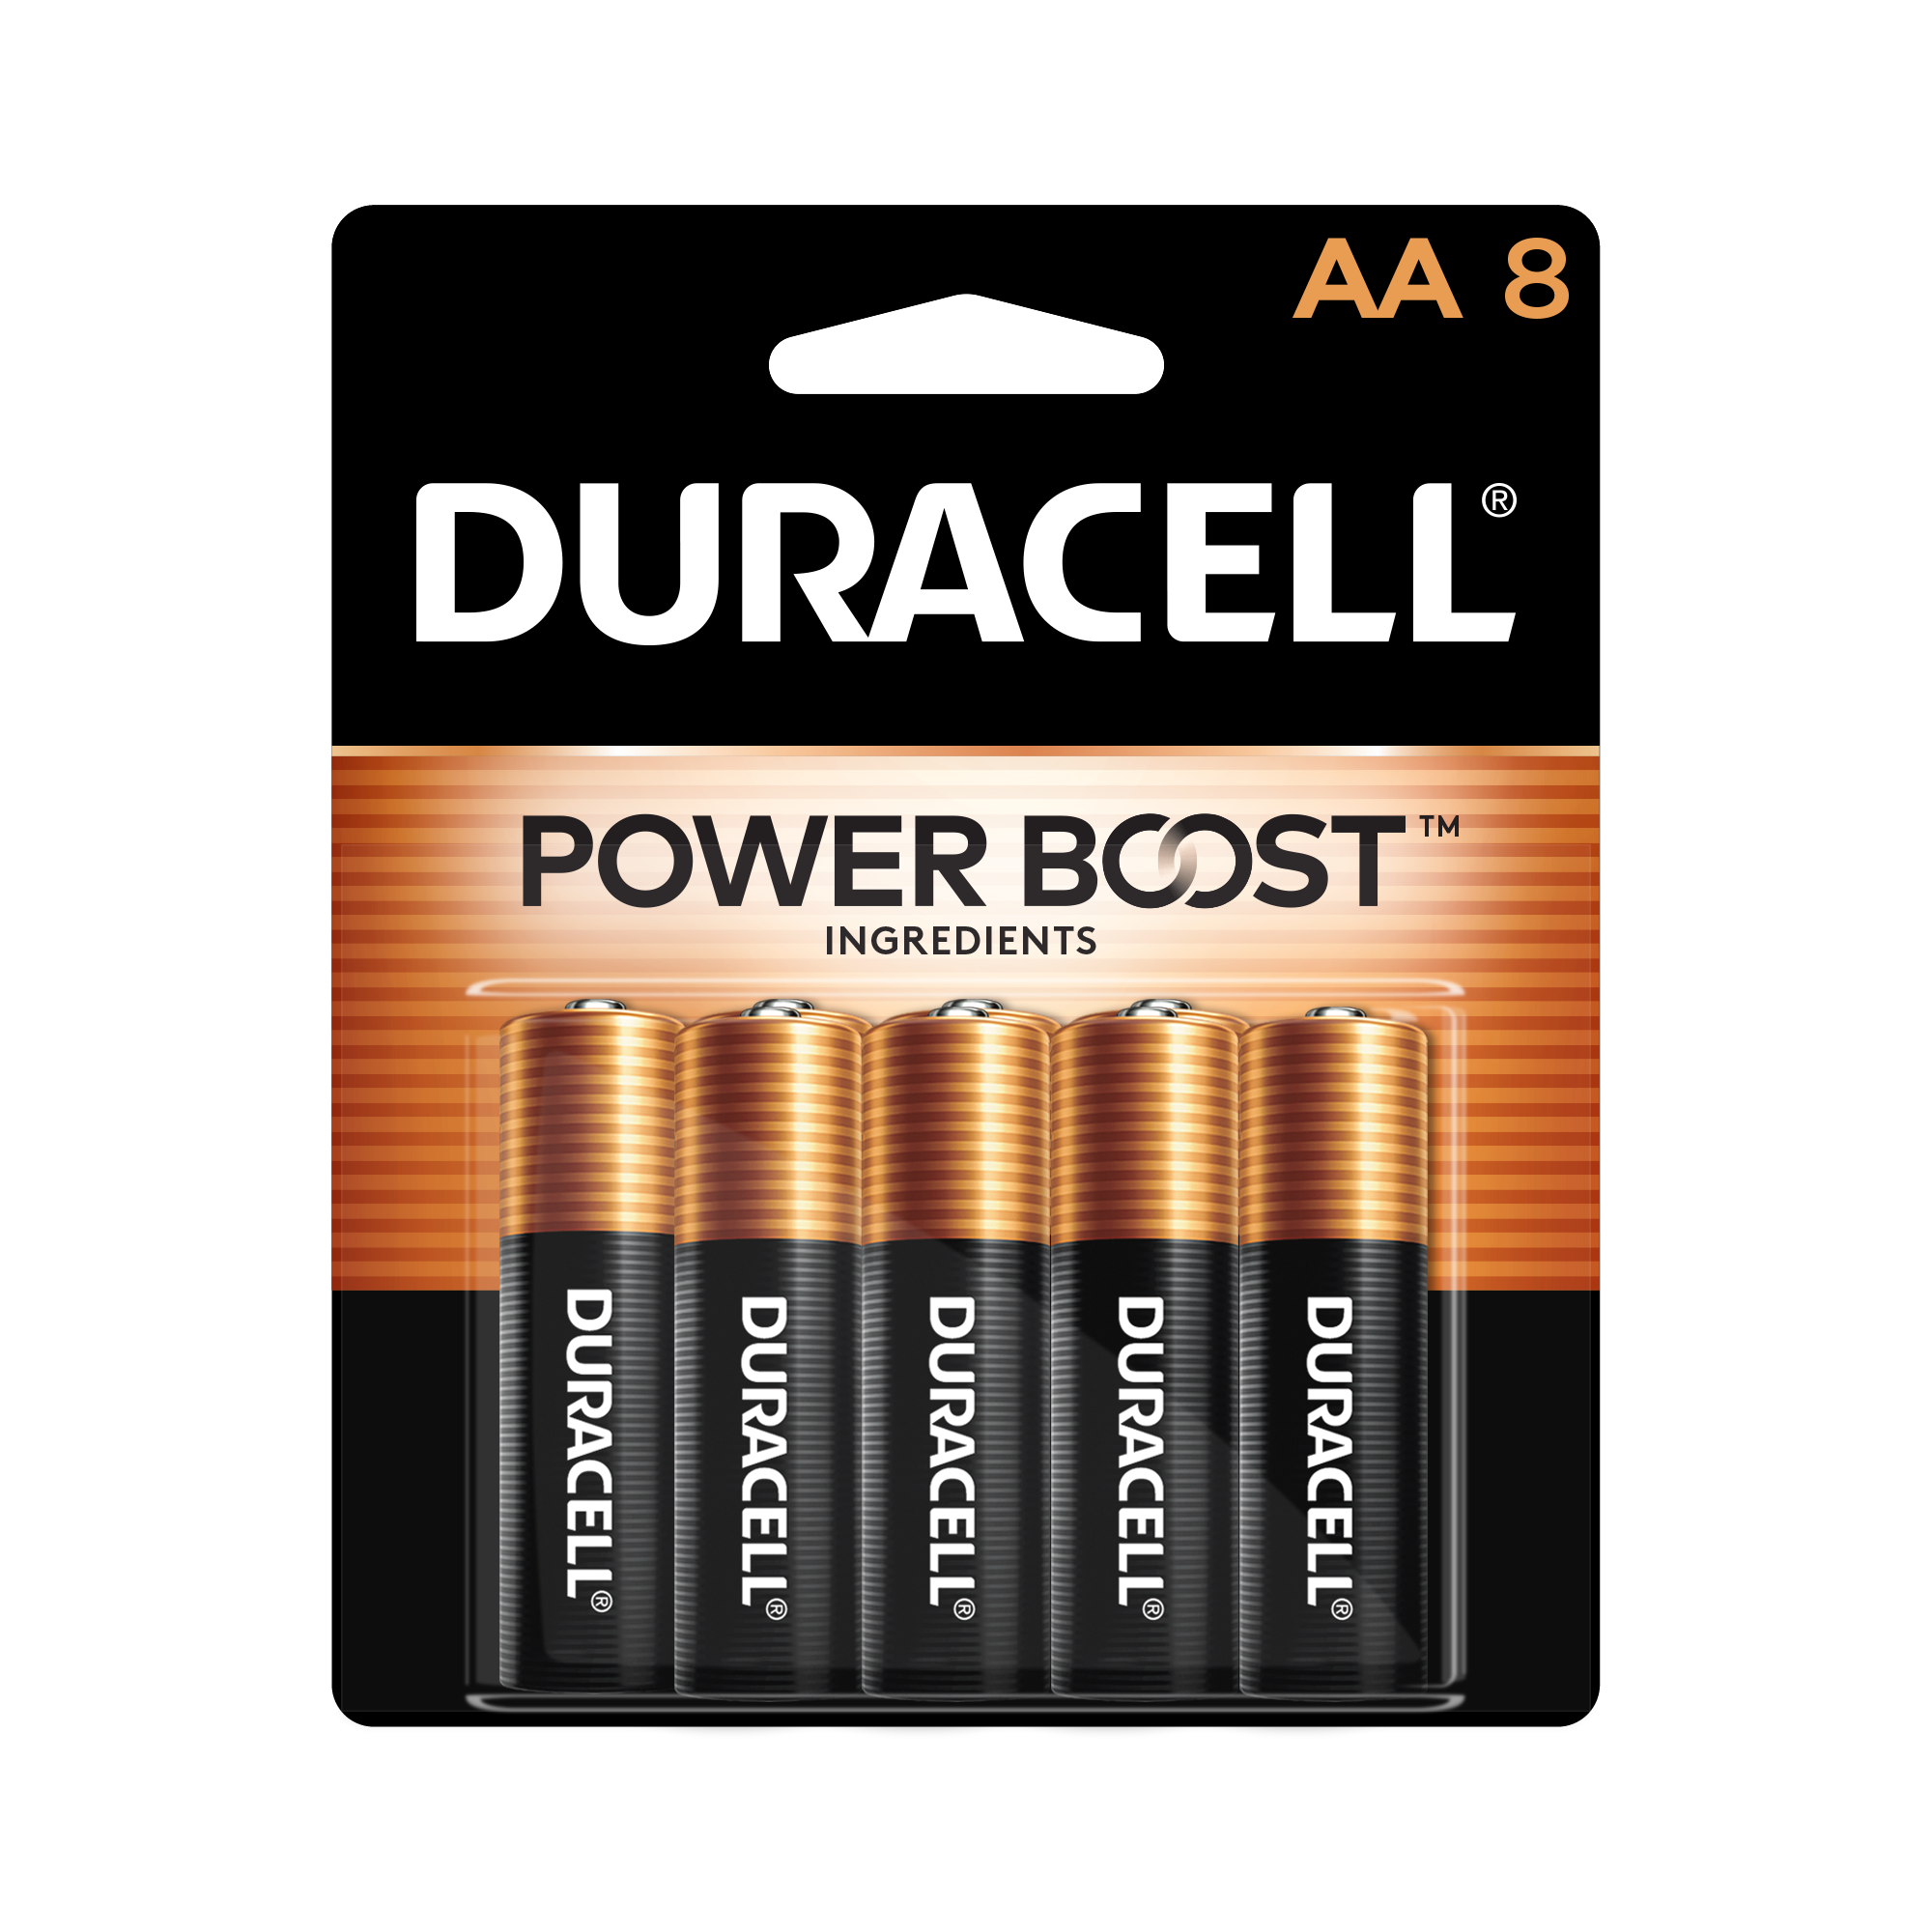 duracell 2032 battery x 1 car fob battery for car alarm and door